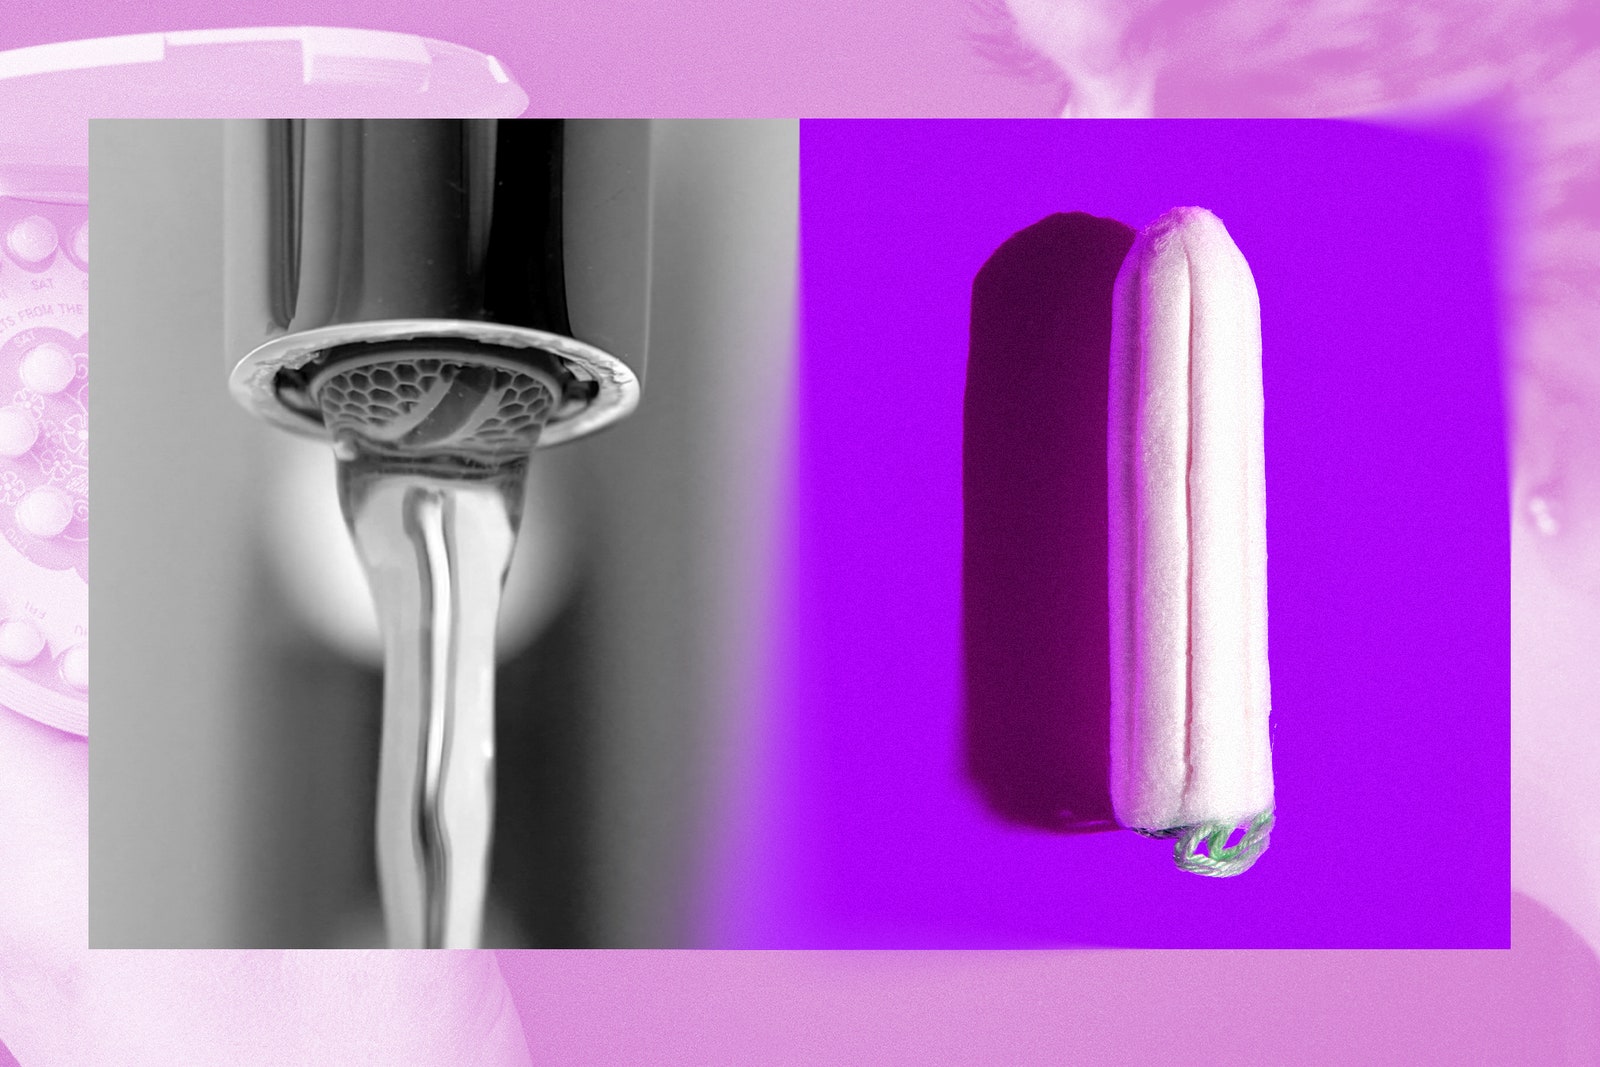 Photo collage of a tampon a faucet turning on and off and a woman holding a circular pack of birth control pills